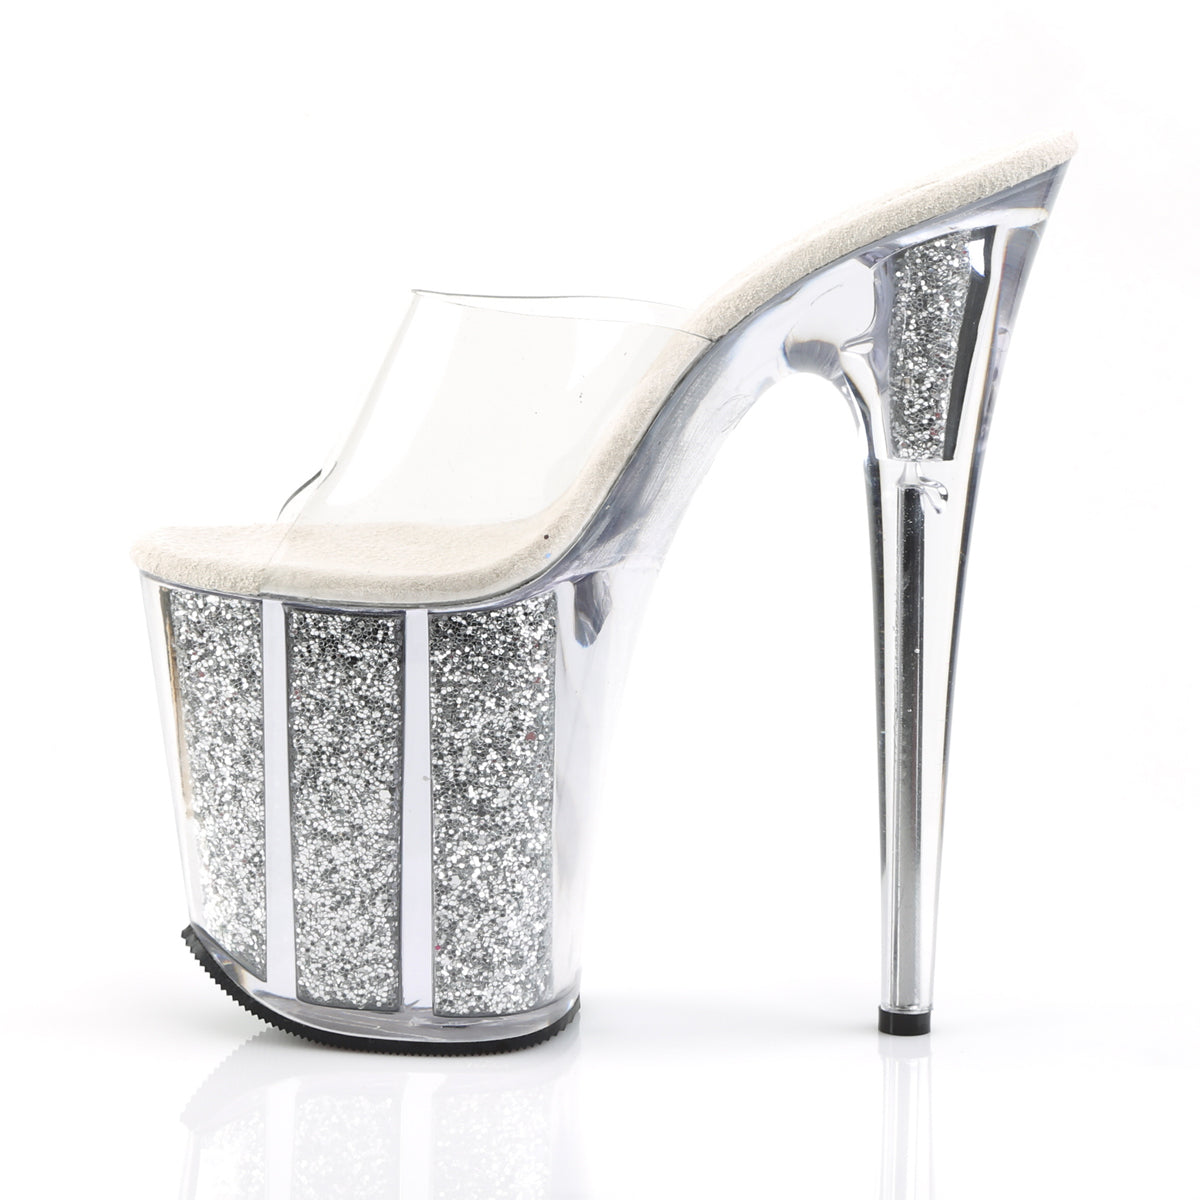 FLAMINGO-801G Pleaser Clear/Silver Glitter Platform Shoes [Exotic Dancing Shoes]